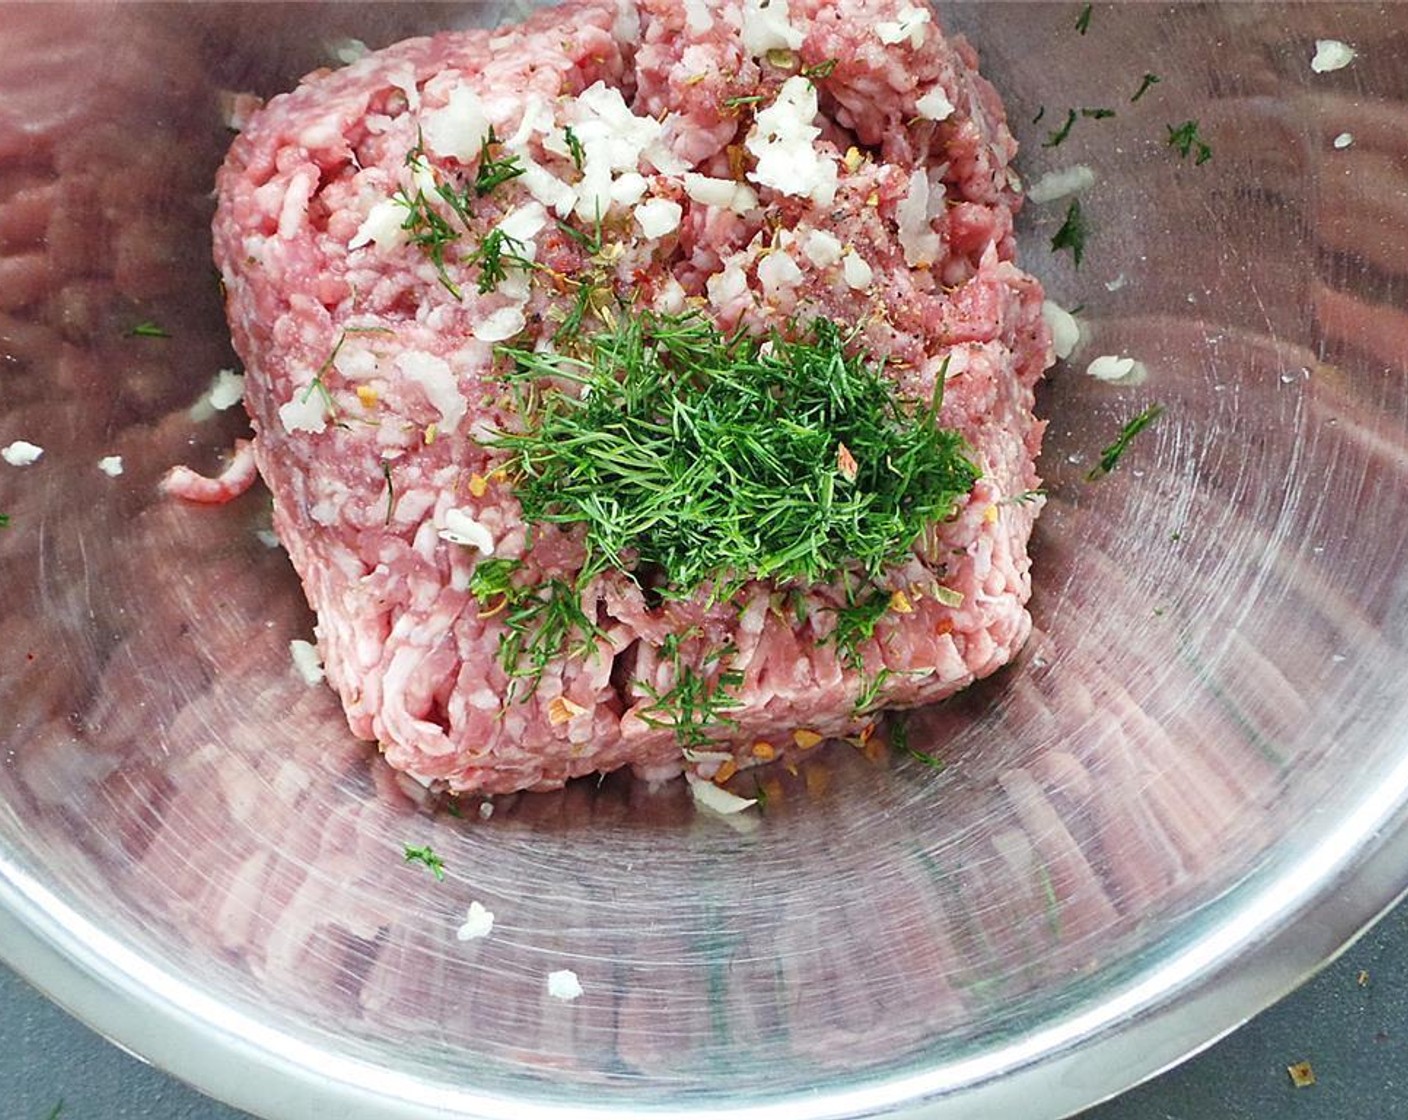 step 1 Add the Ground Lamb (1 lb), Fresh Dill (1 Tbsp), Mediterranean Spices (1/2 Tbsp), Crushed Red Pepper Flakes (1 pinch), Salt (to taste), and Ground Black Pepper (to taste) to a large bowl.